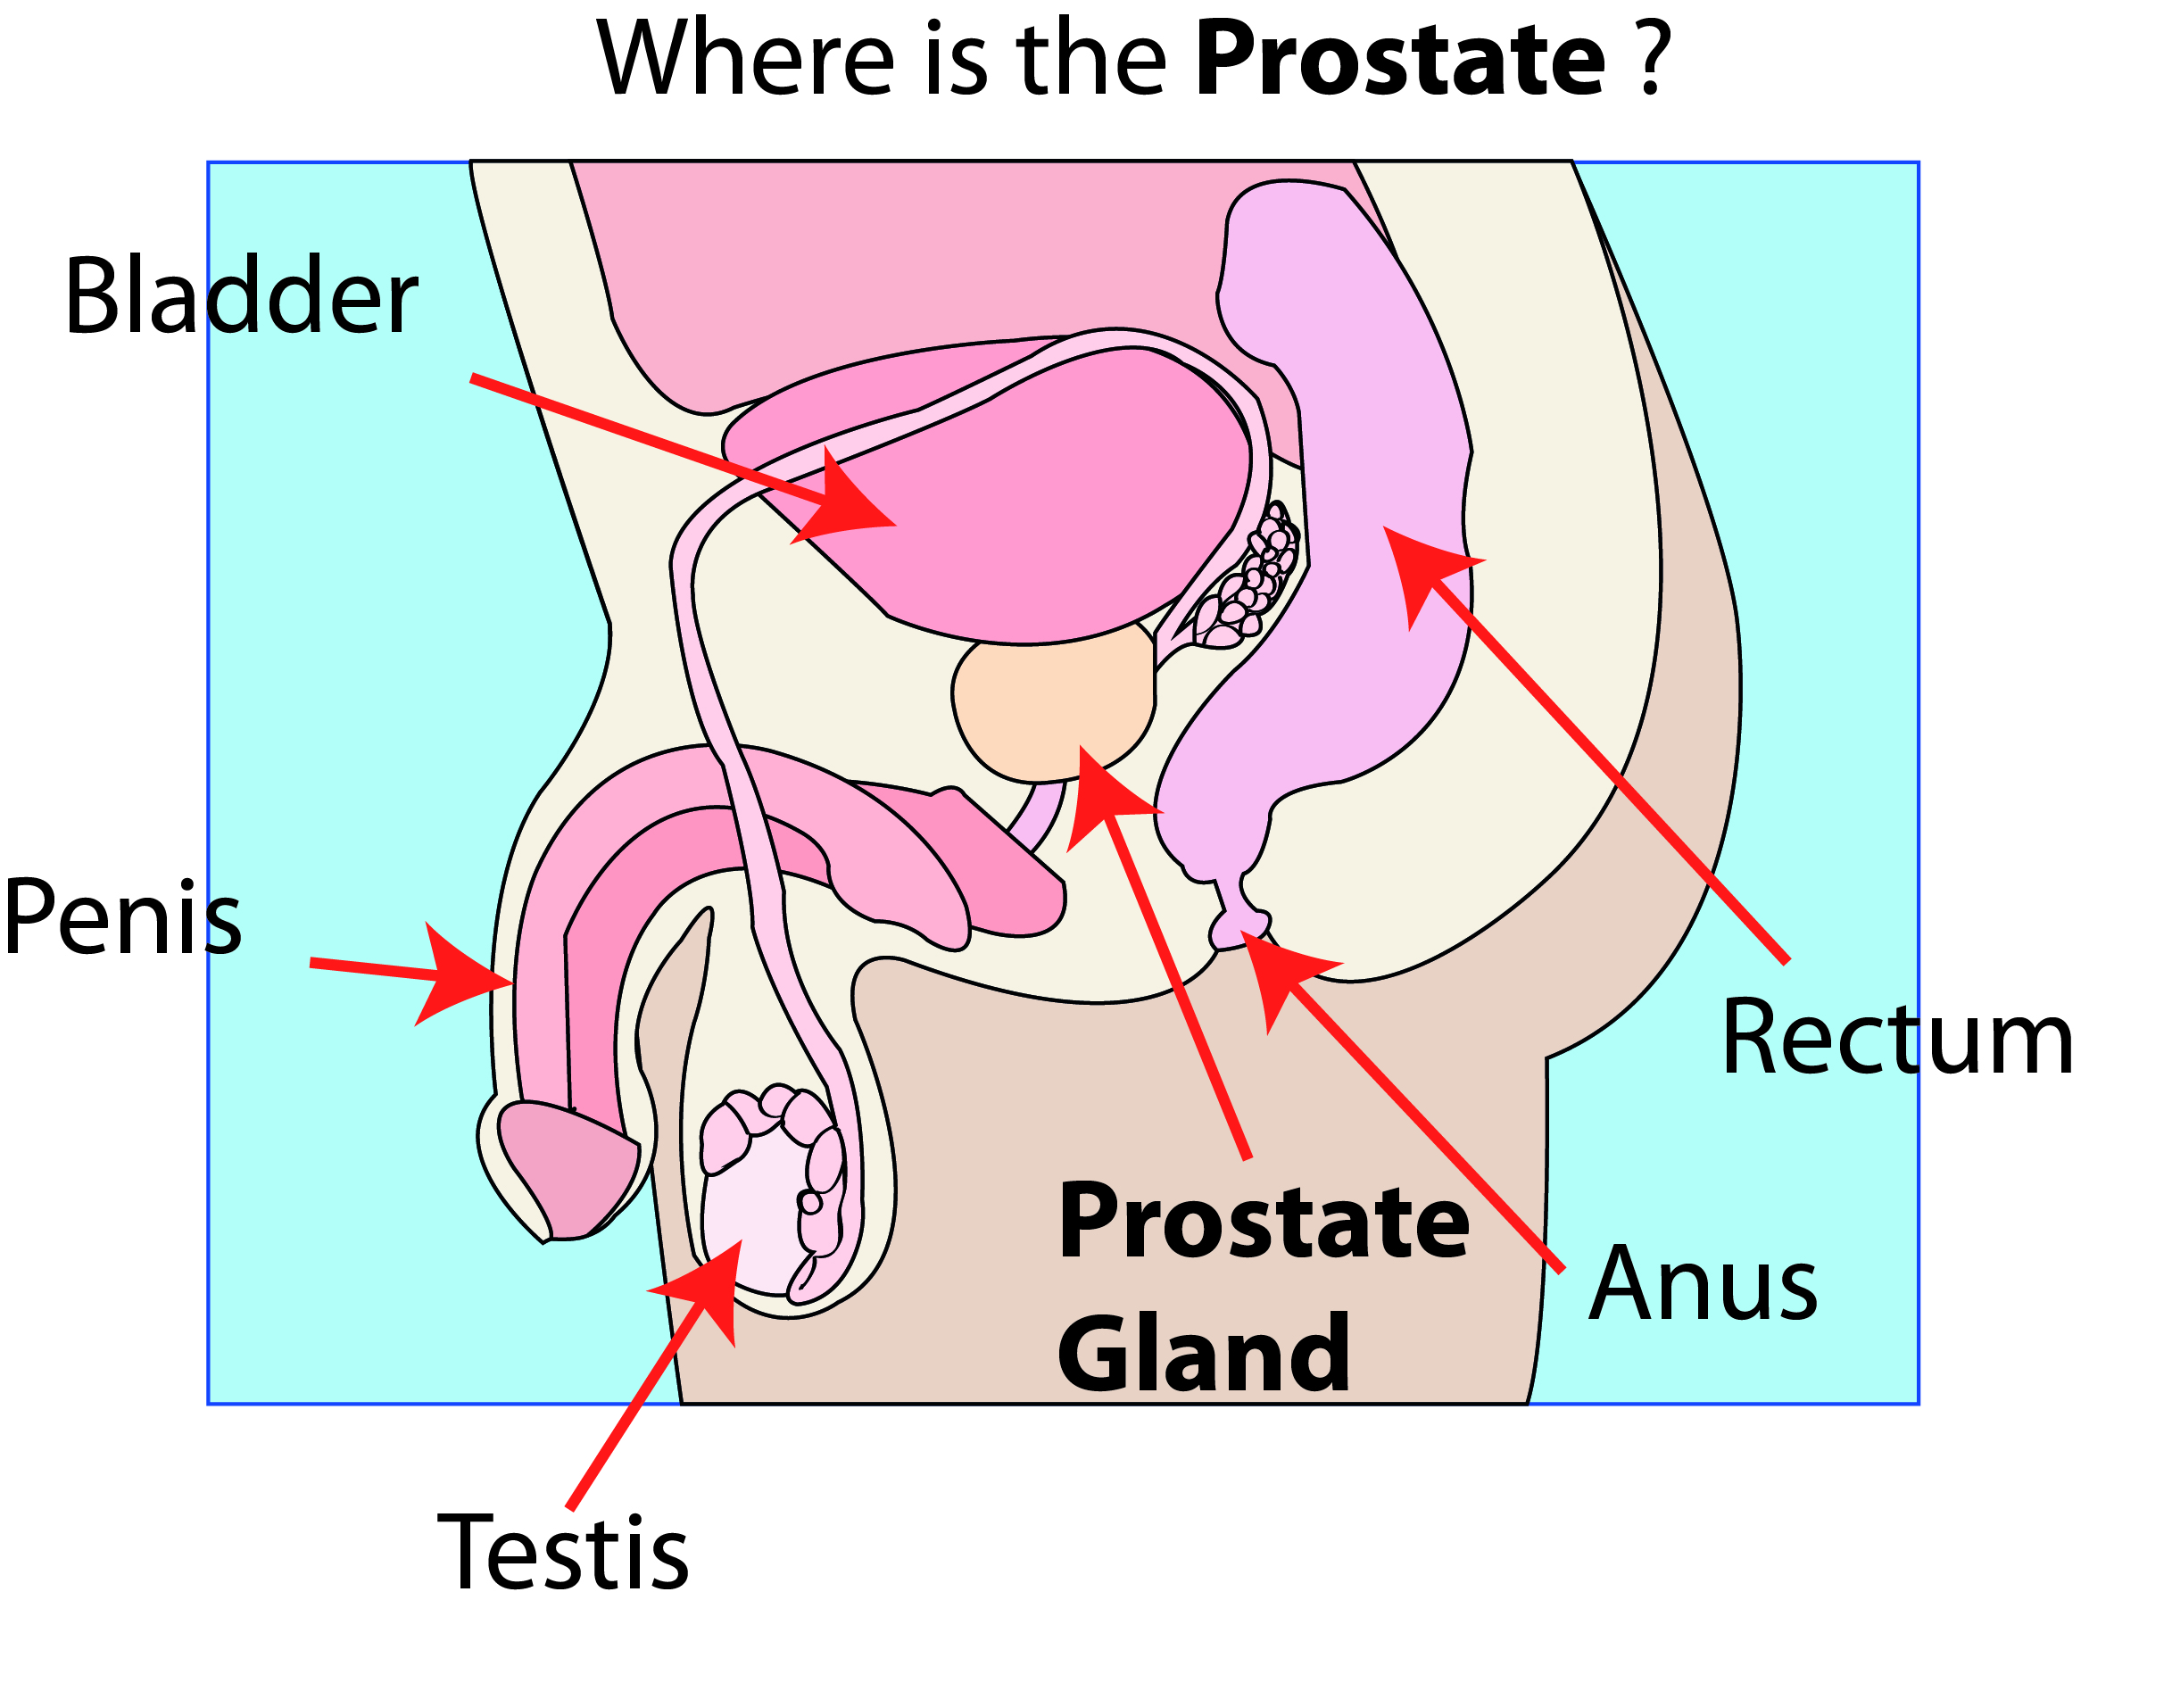 The position of the prostate